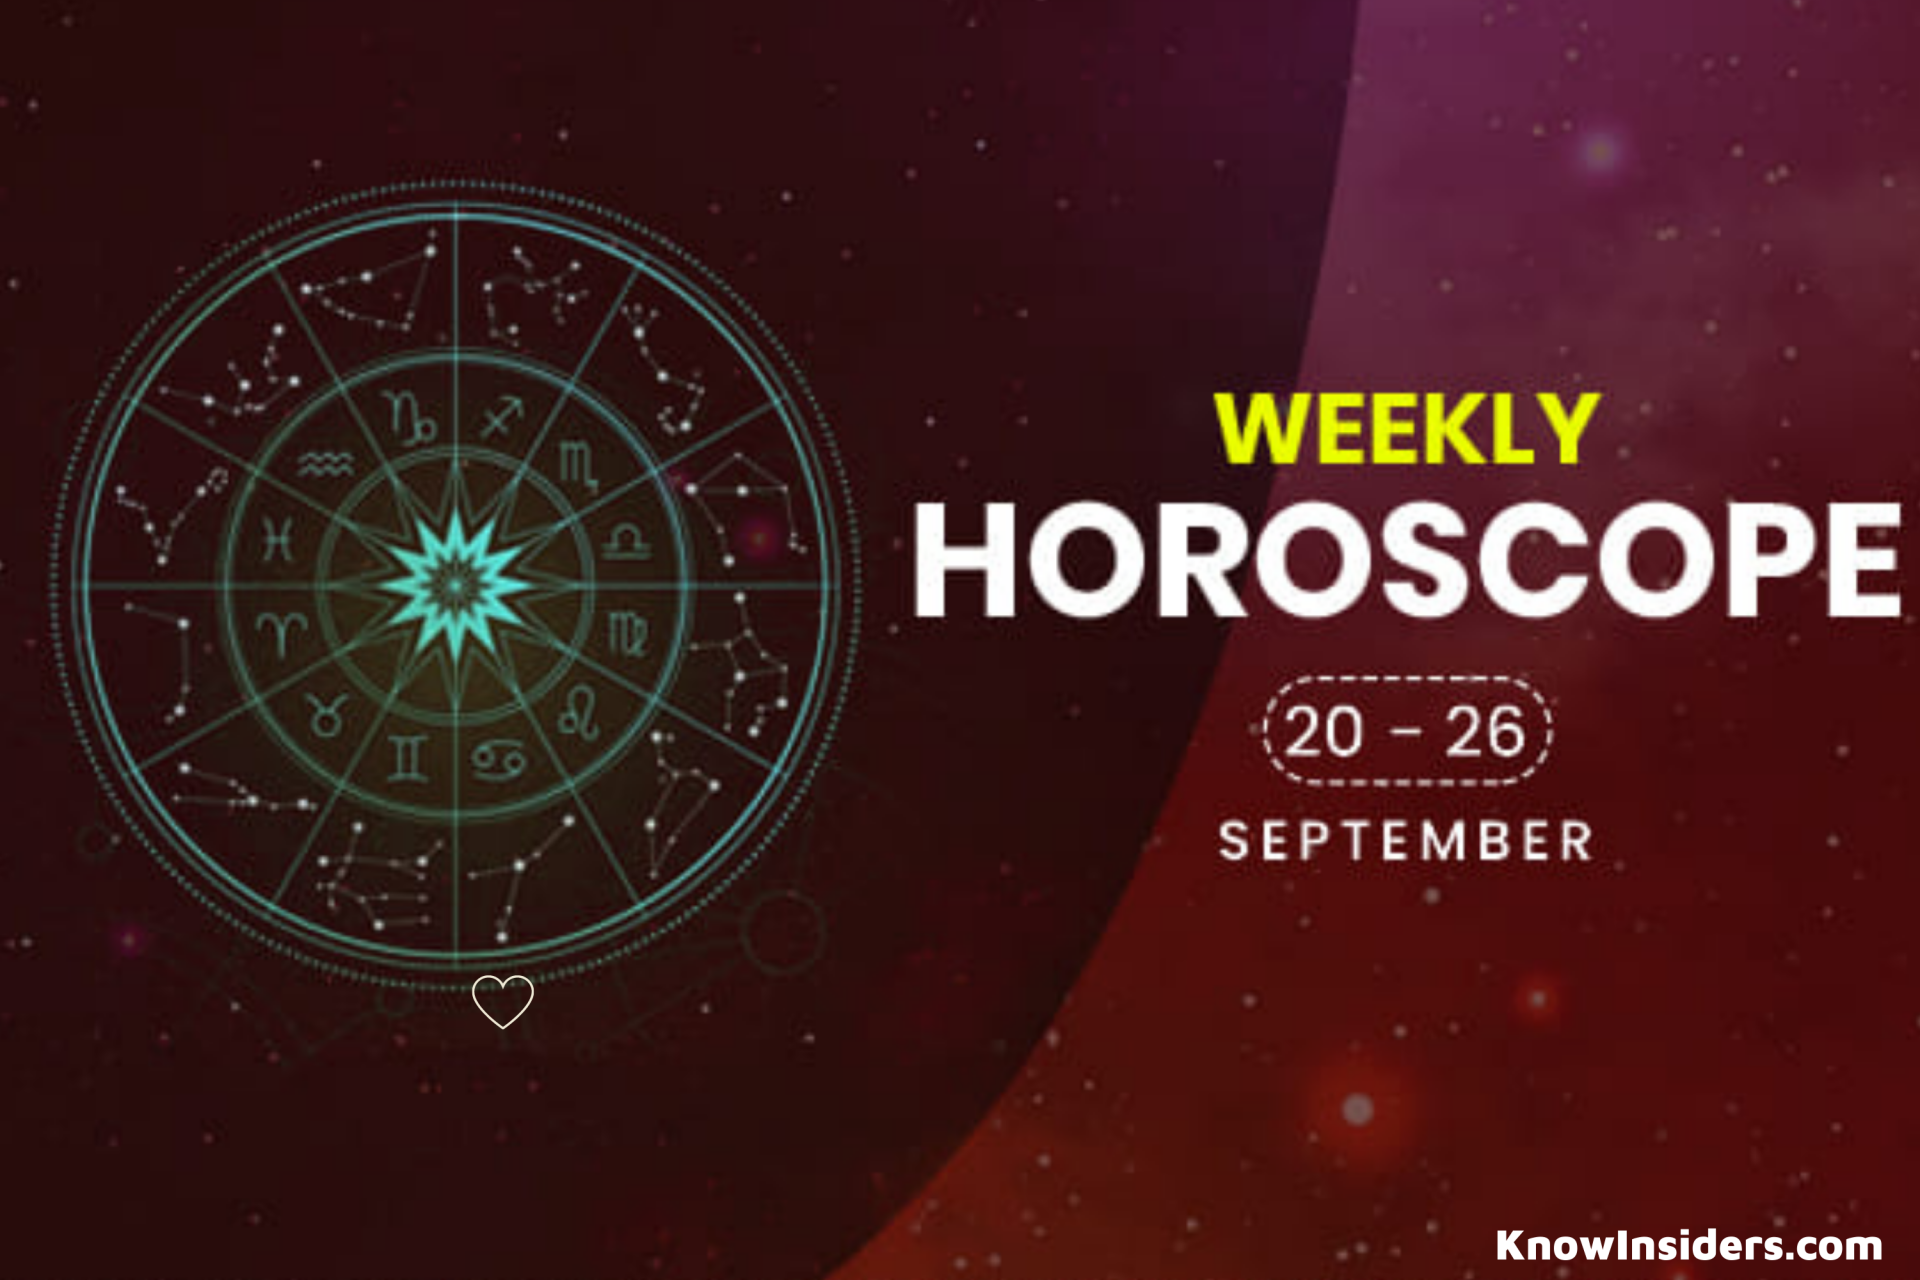 Weekly horoscope for all zodiac signs from September 20th to 26th. Photo: KnowInsiders